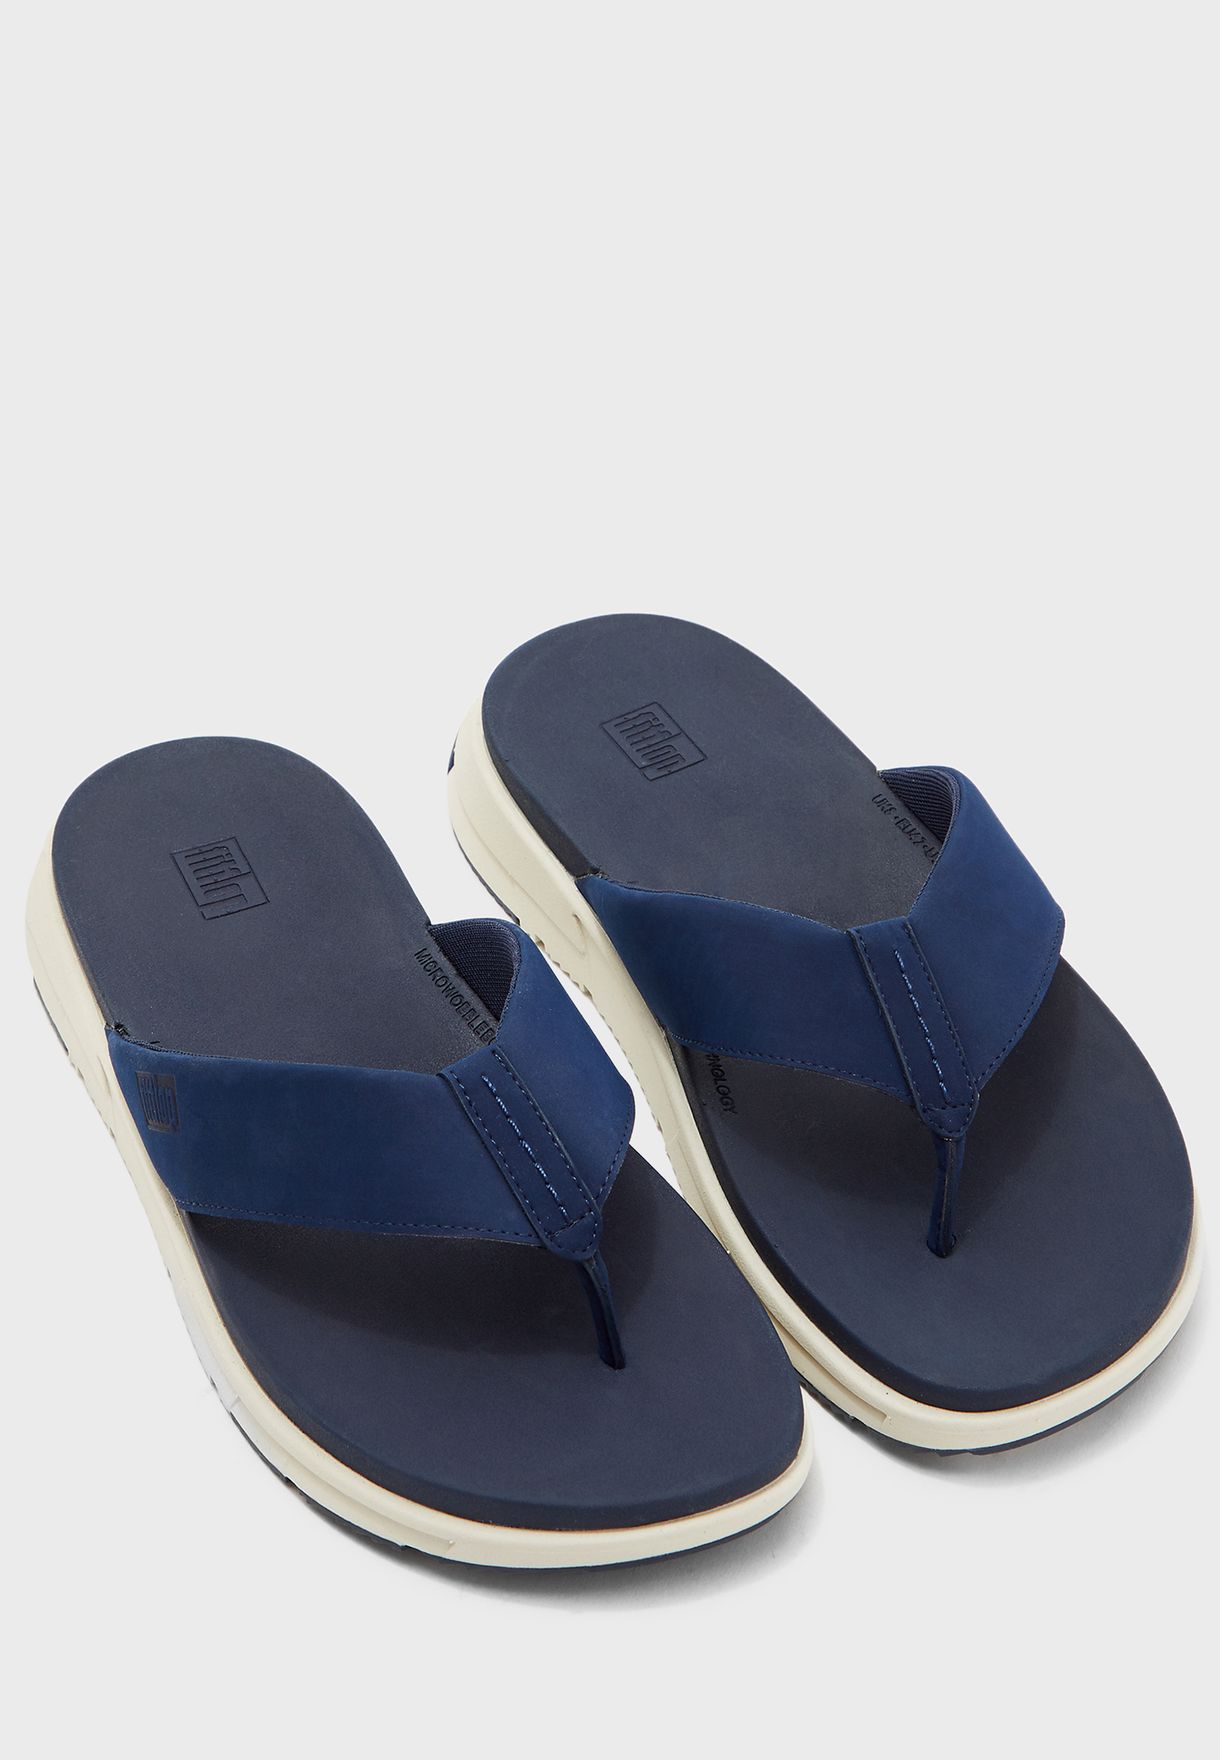 cheapest place to buy fitflops